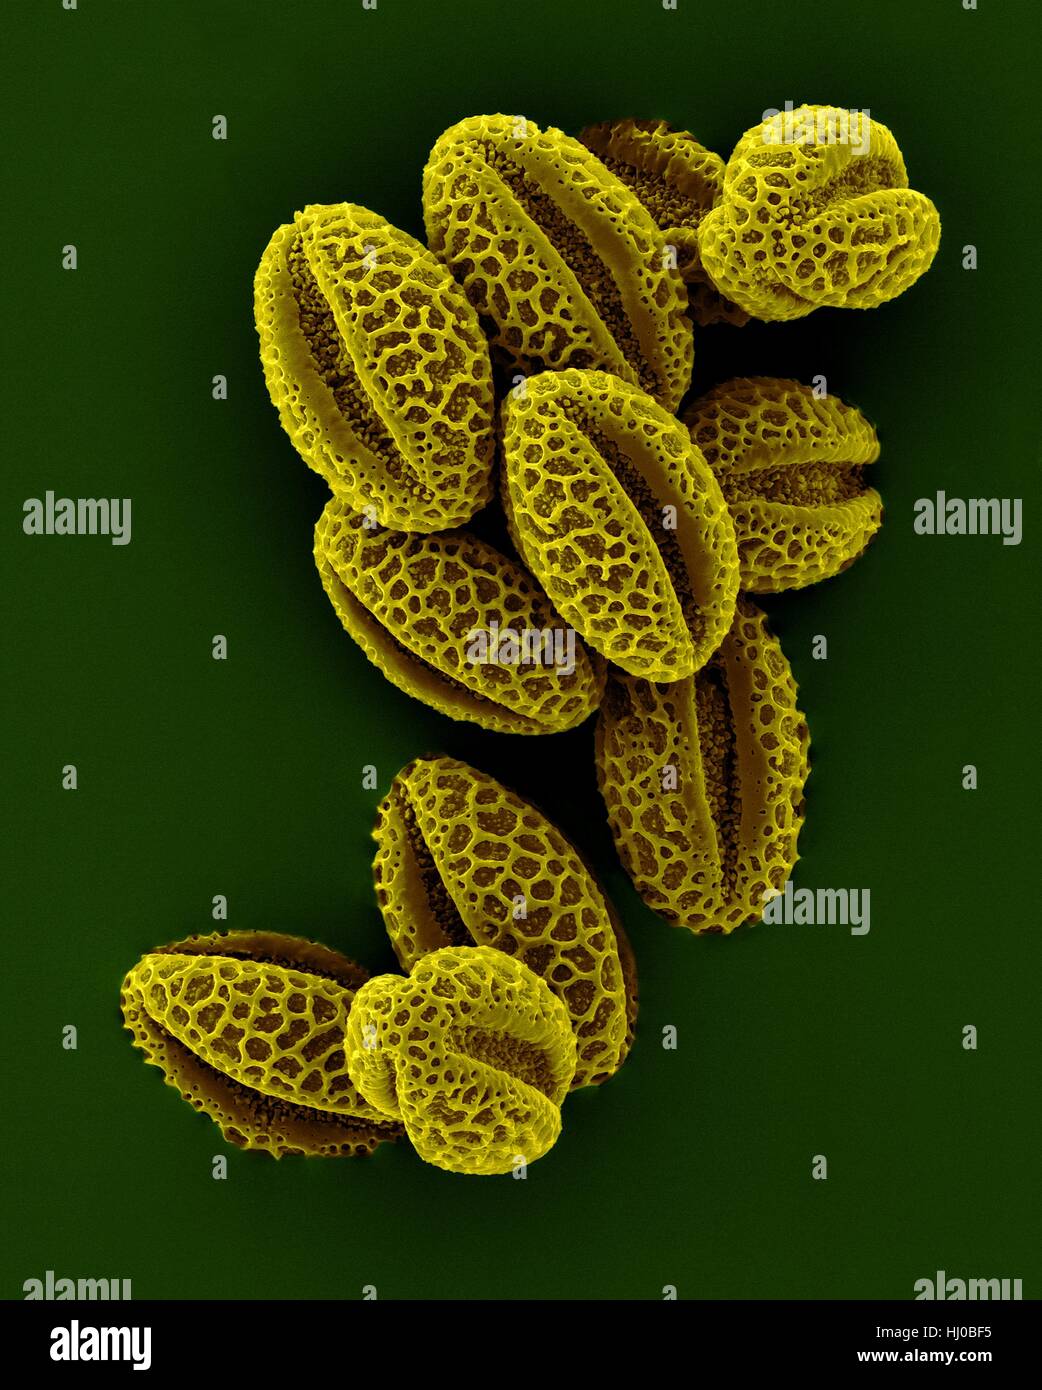 Weeping willow pollen (Salix babylonica), coloured scanning electron micrograph (SEM). The willow (and poplar) family, Saliaceae, is characterized by having their flowers in catkins, the staminate (male) blossoms are on distinct trees from the pistillate (female) trees. Insect pollination occurs during the months of May through August. The weeping willow belongs to the group known as crack willows, from the brittleness of their twigs at the joints. Magnification: x260 when shortest axis printed at 25 millimetres. Stock Photo